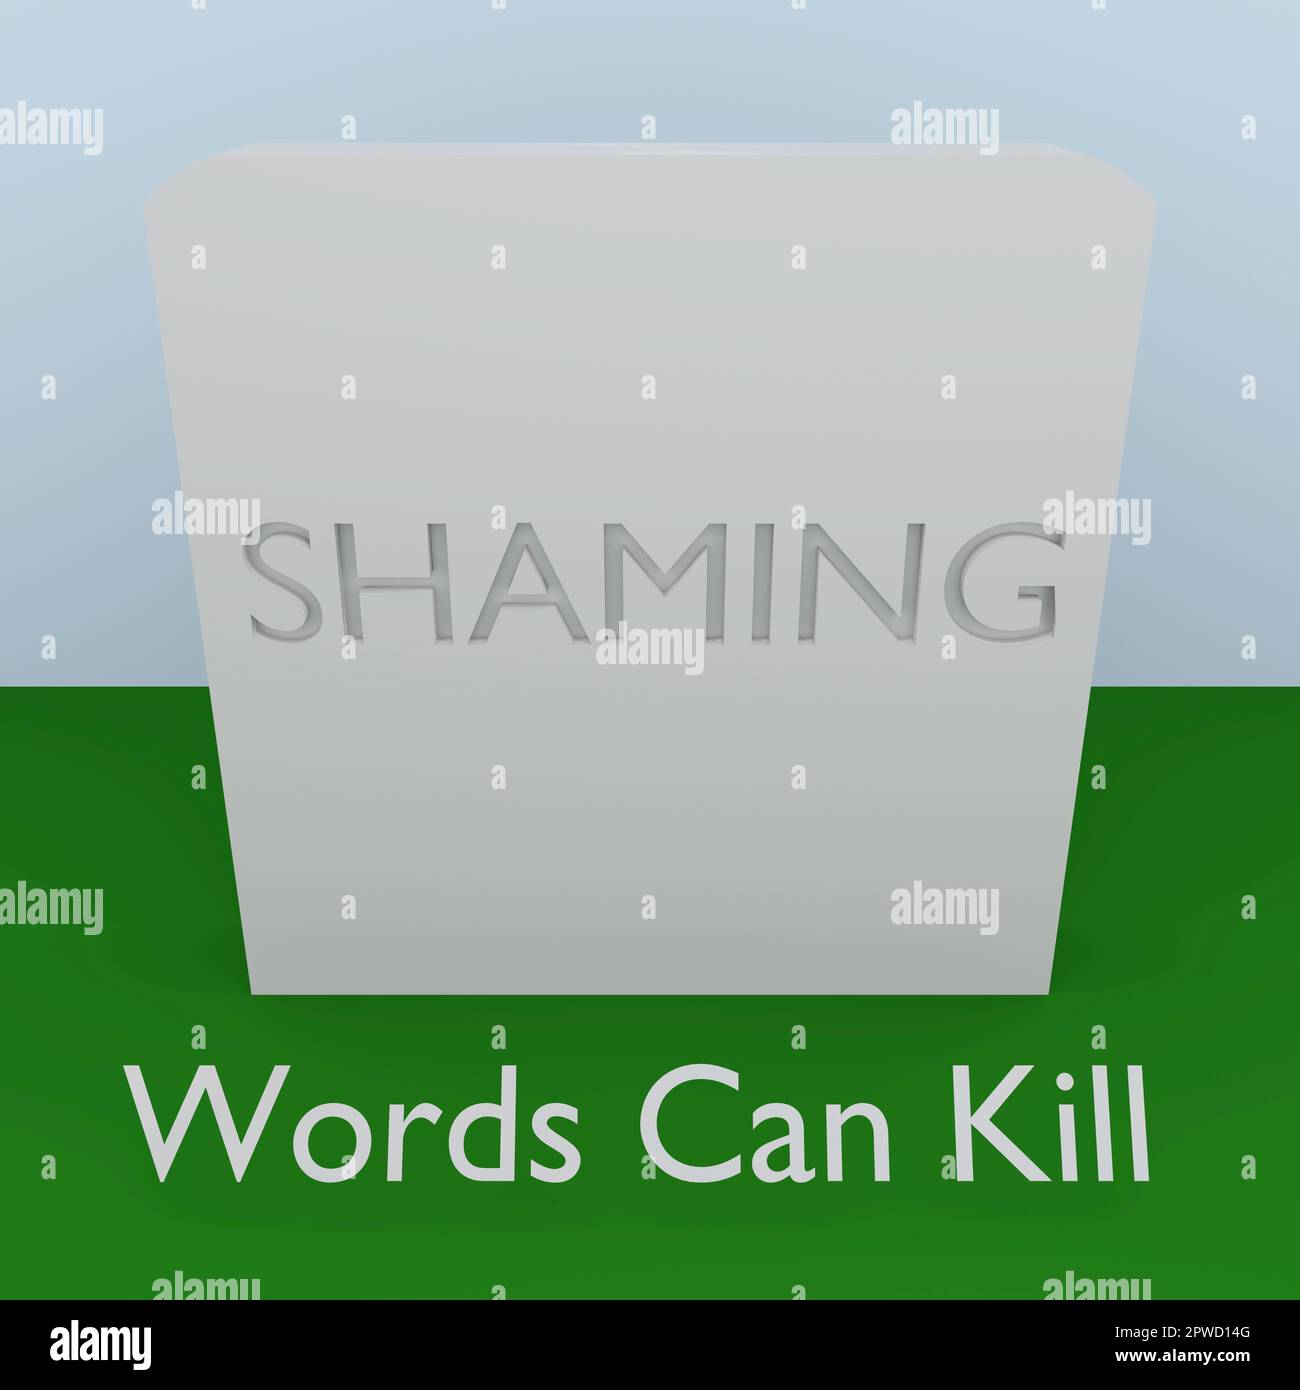 3d illustration of a symbolic gravestone named as SHAMING, titled as Words Can Kill. Stock Photo